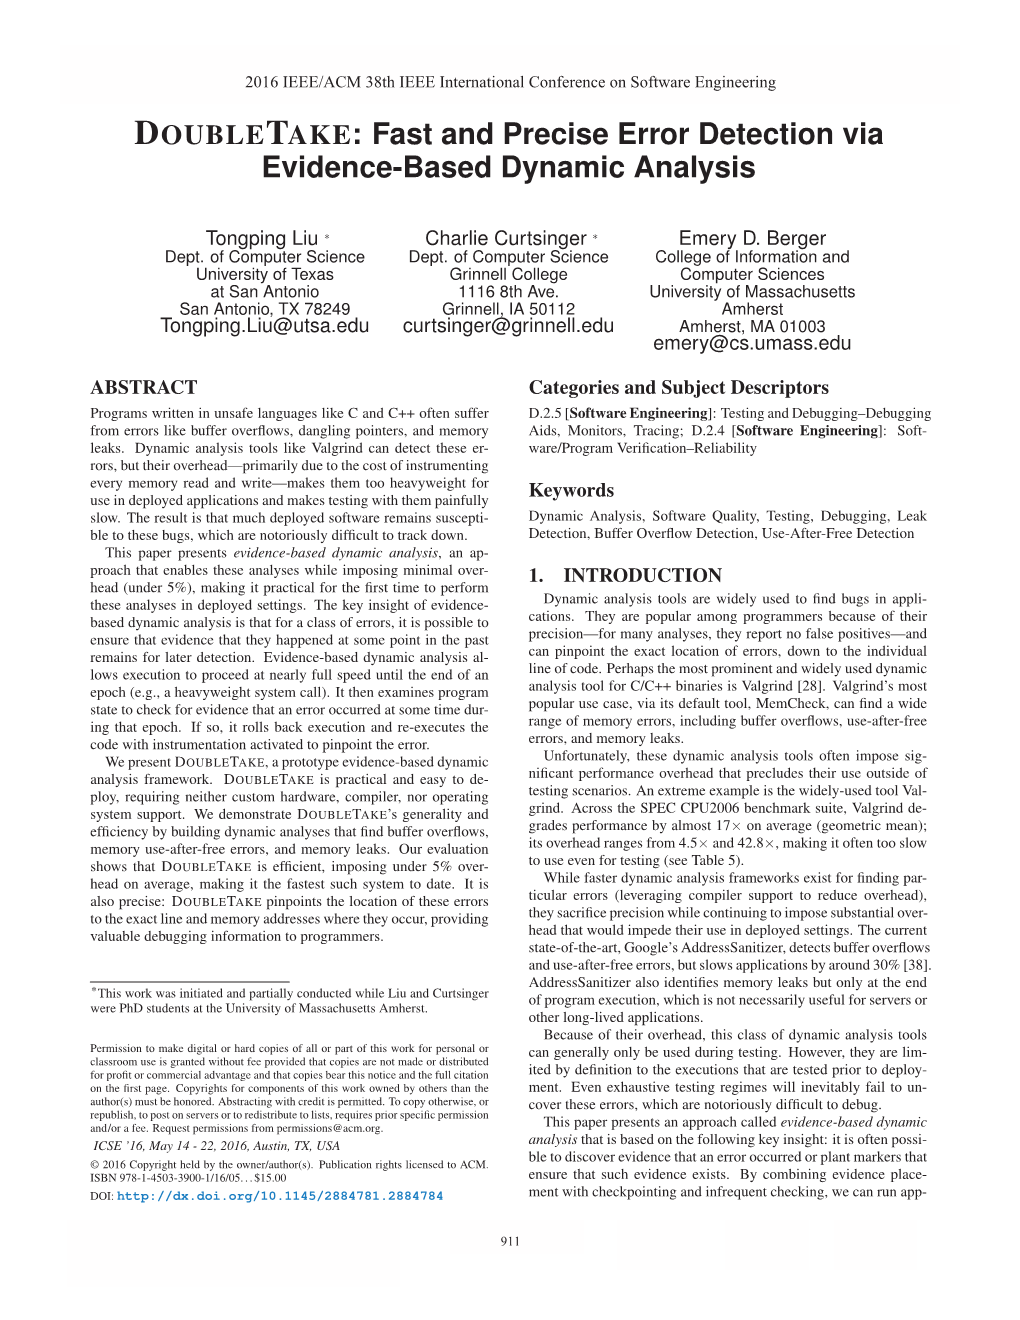 DOUBLETAKE: Fast and Precise Error Detection Via Evidence-Based Dynamic Analysis